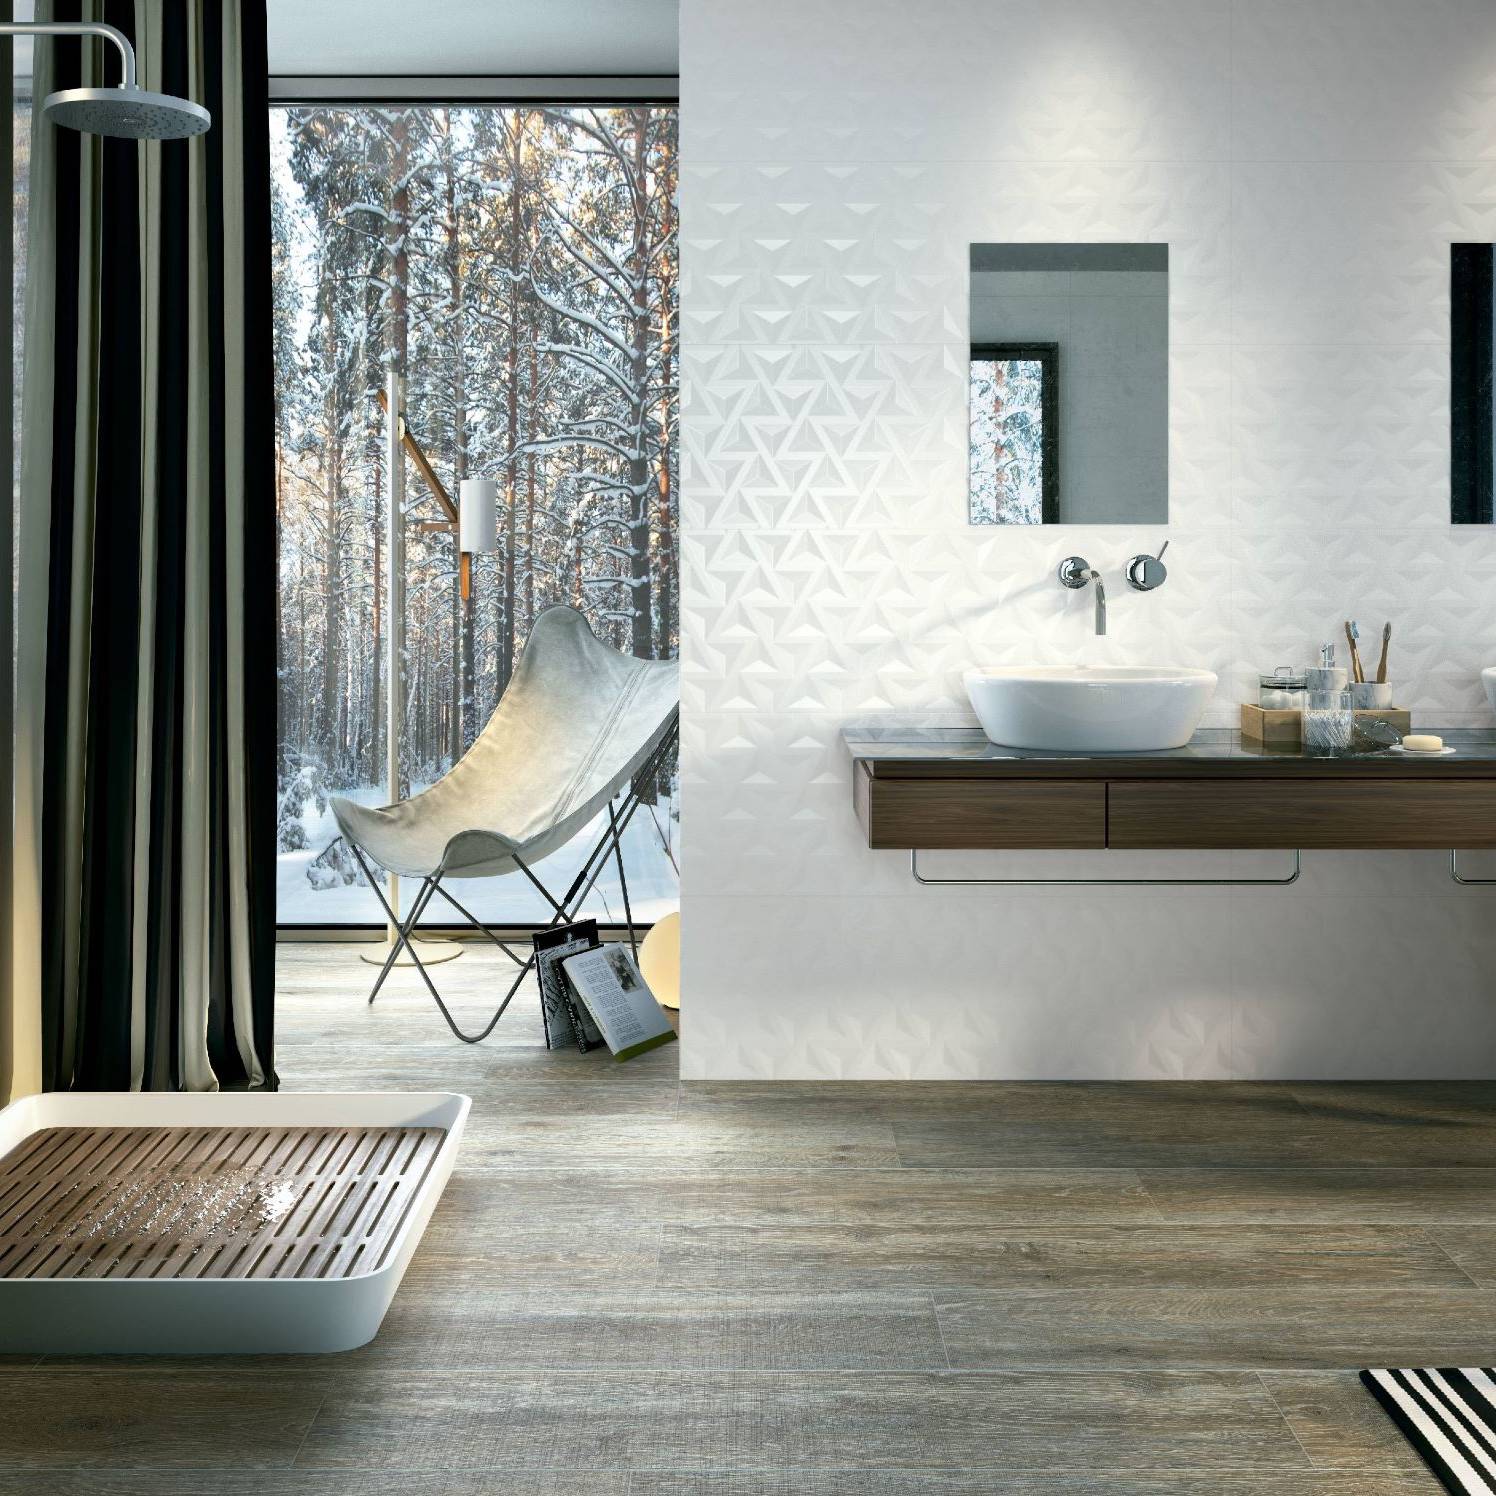 Artic_2_G | Stones & More | Finest selection of Mosaics, Glass, Tile and Stone